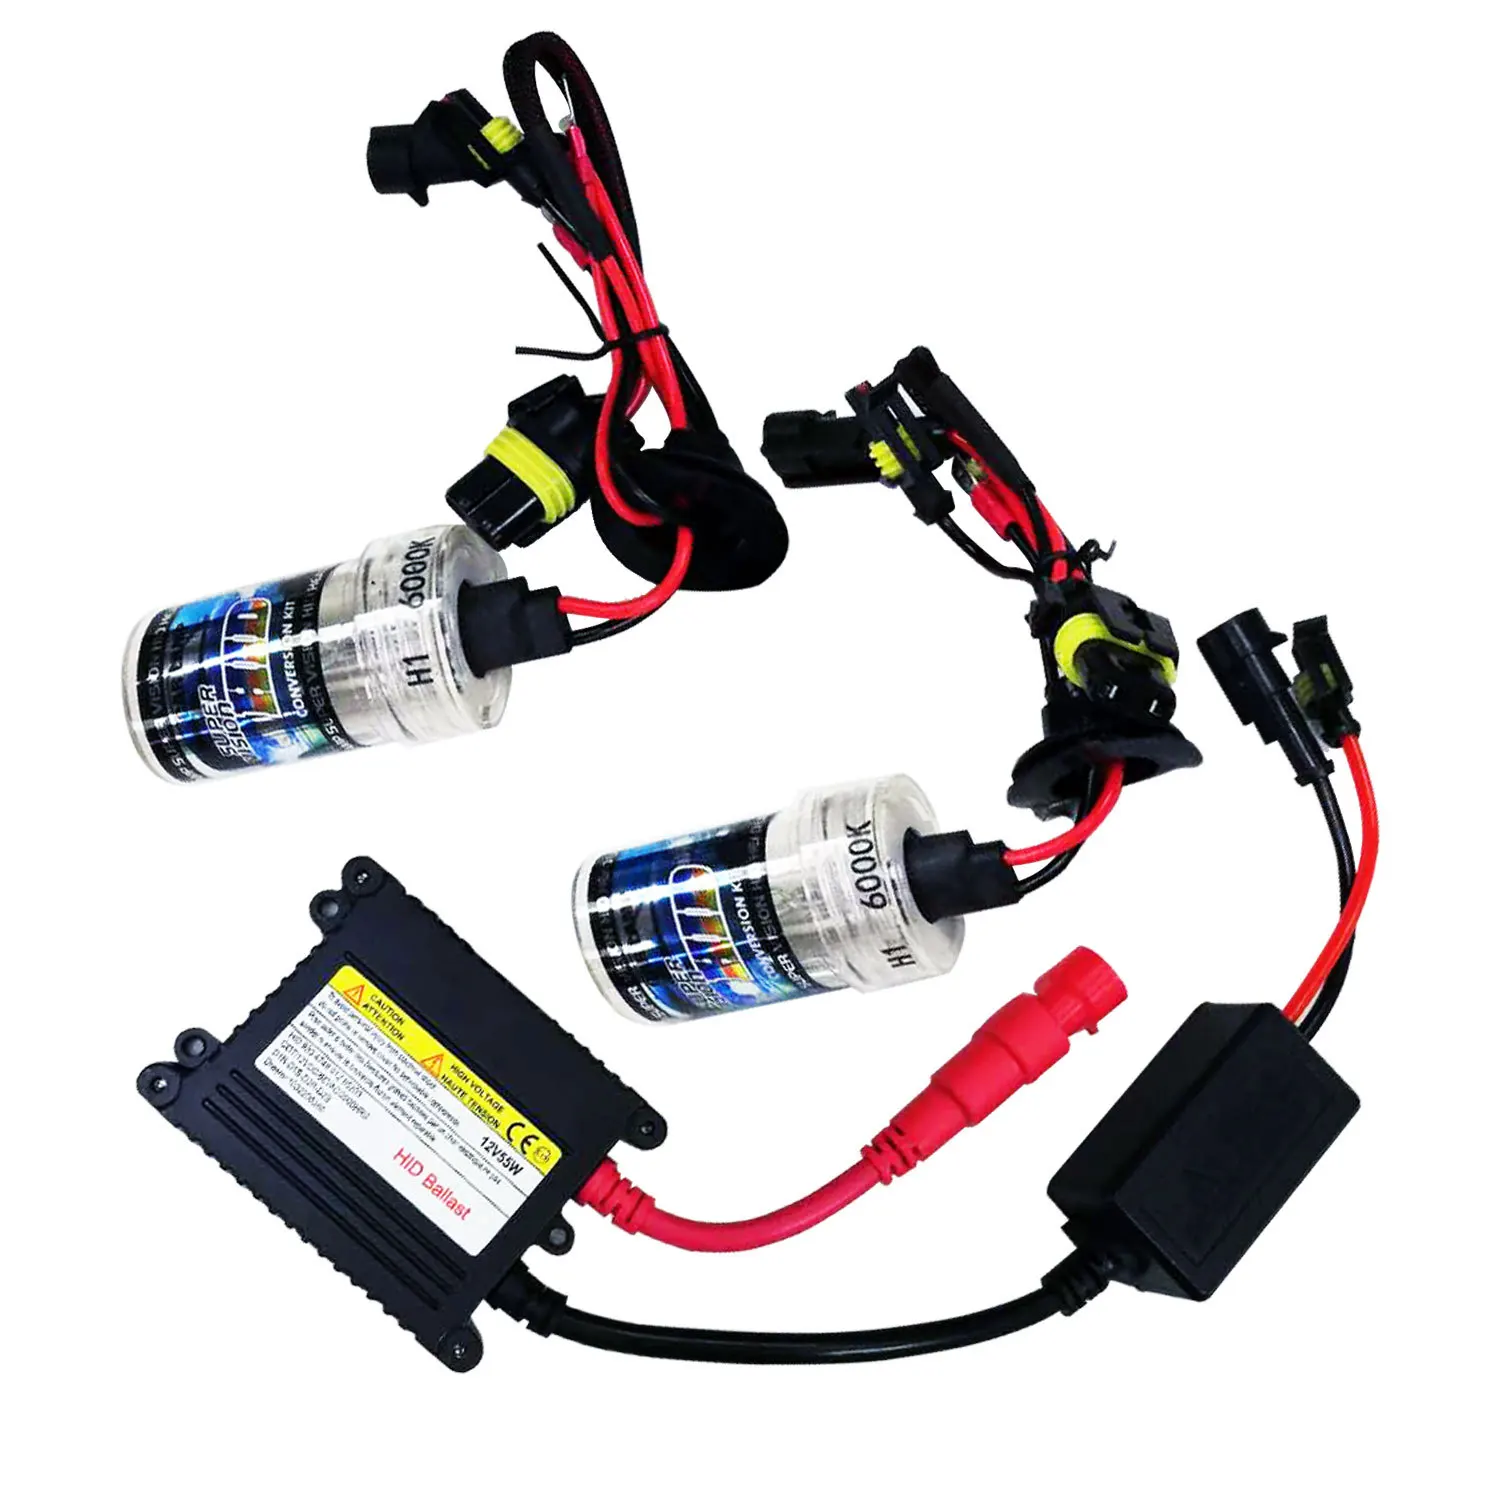 

HID Xenon Lamp Set 12v Lights Ultra-Thin D1063 High Intensity Discharge H1 High Beam Set Manufacturers Wholesale